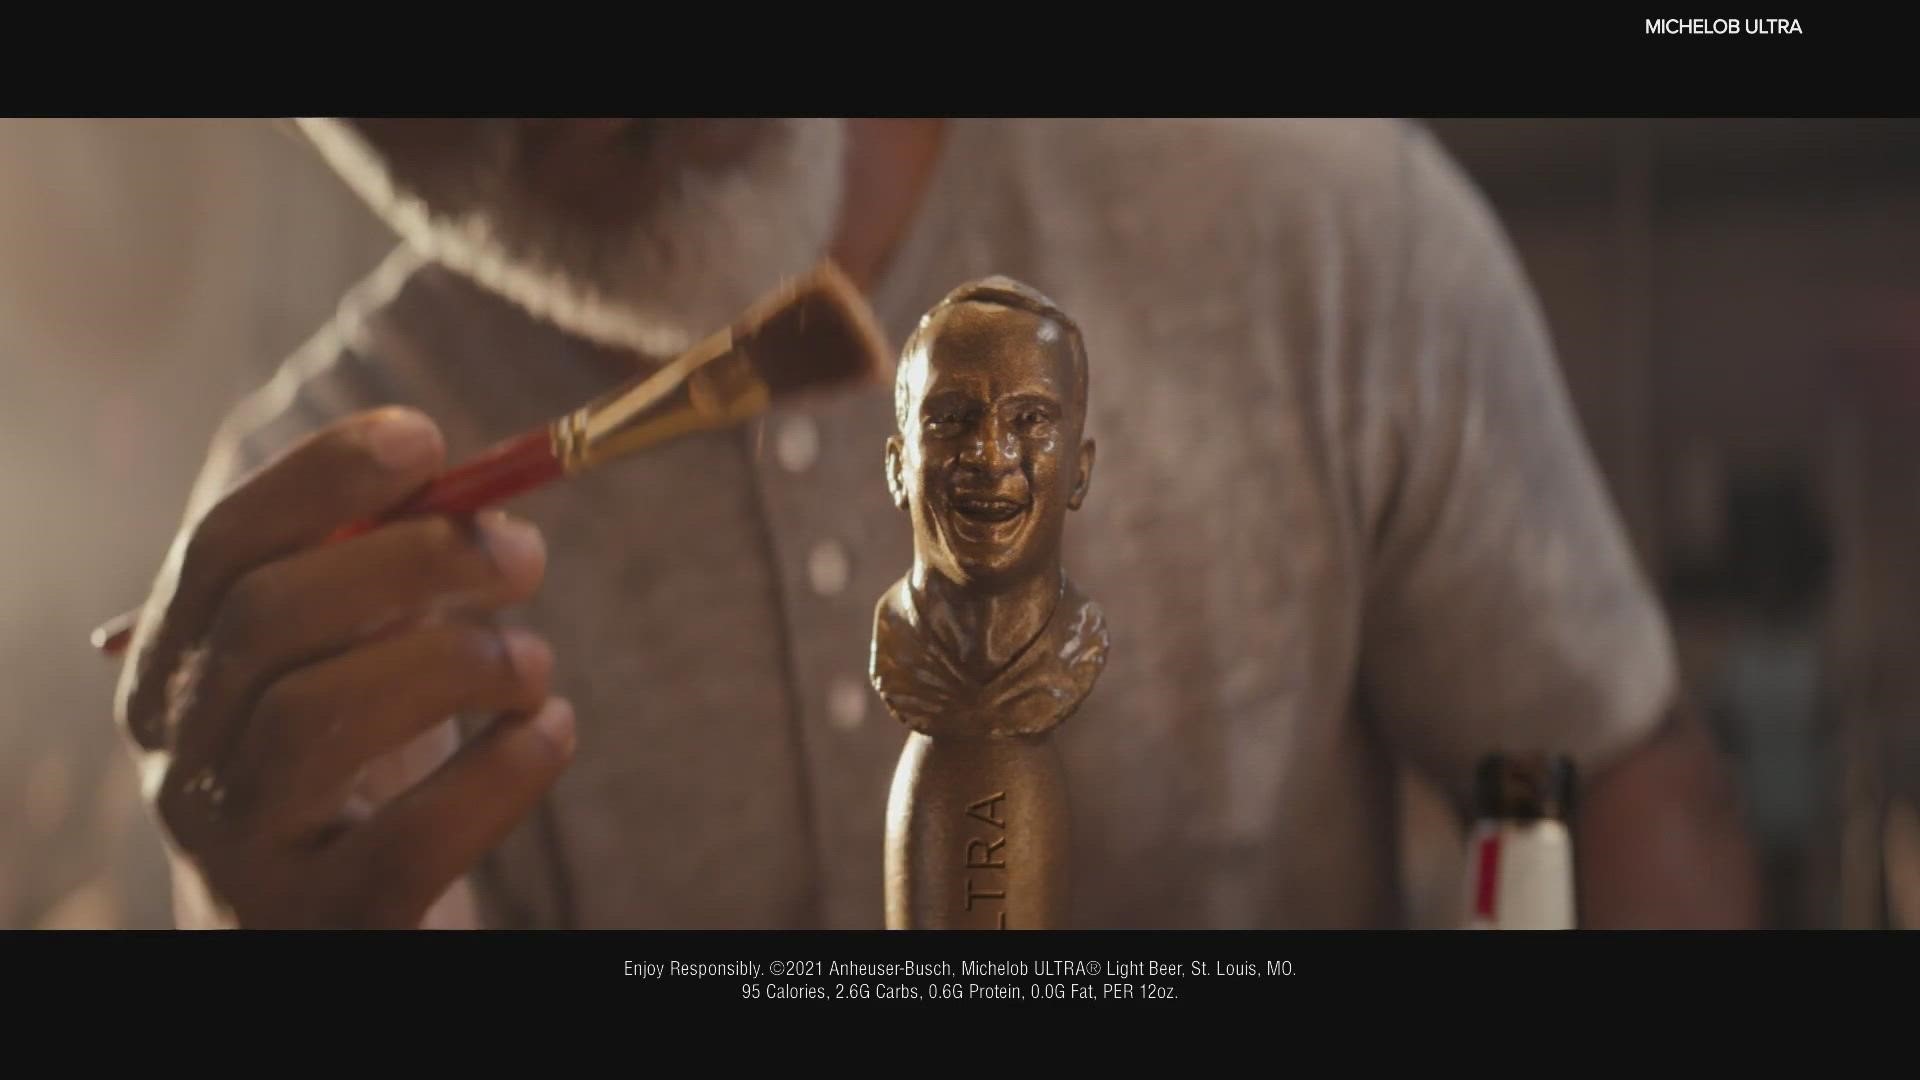 The tributes include a 'smiling Peyton tap handle'.